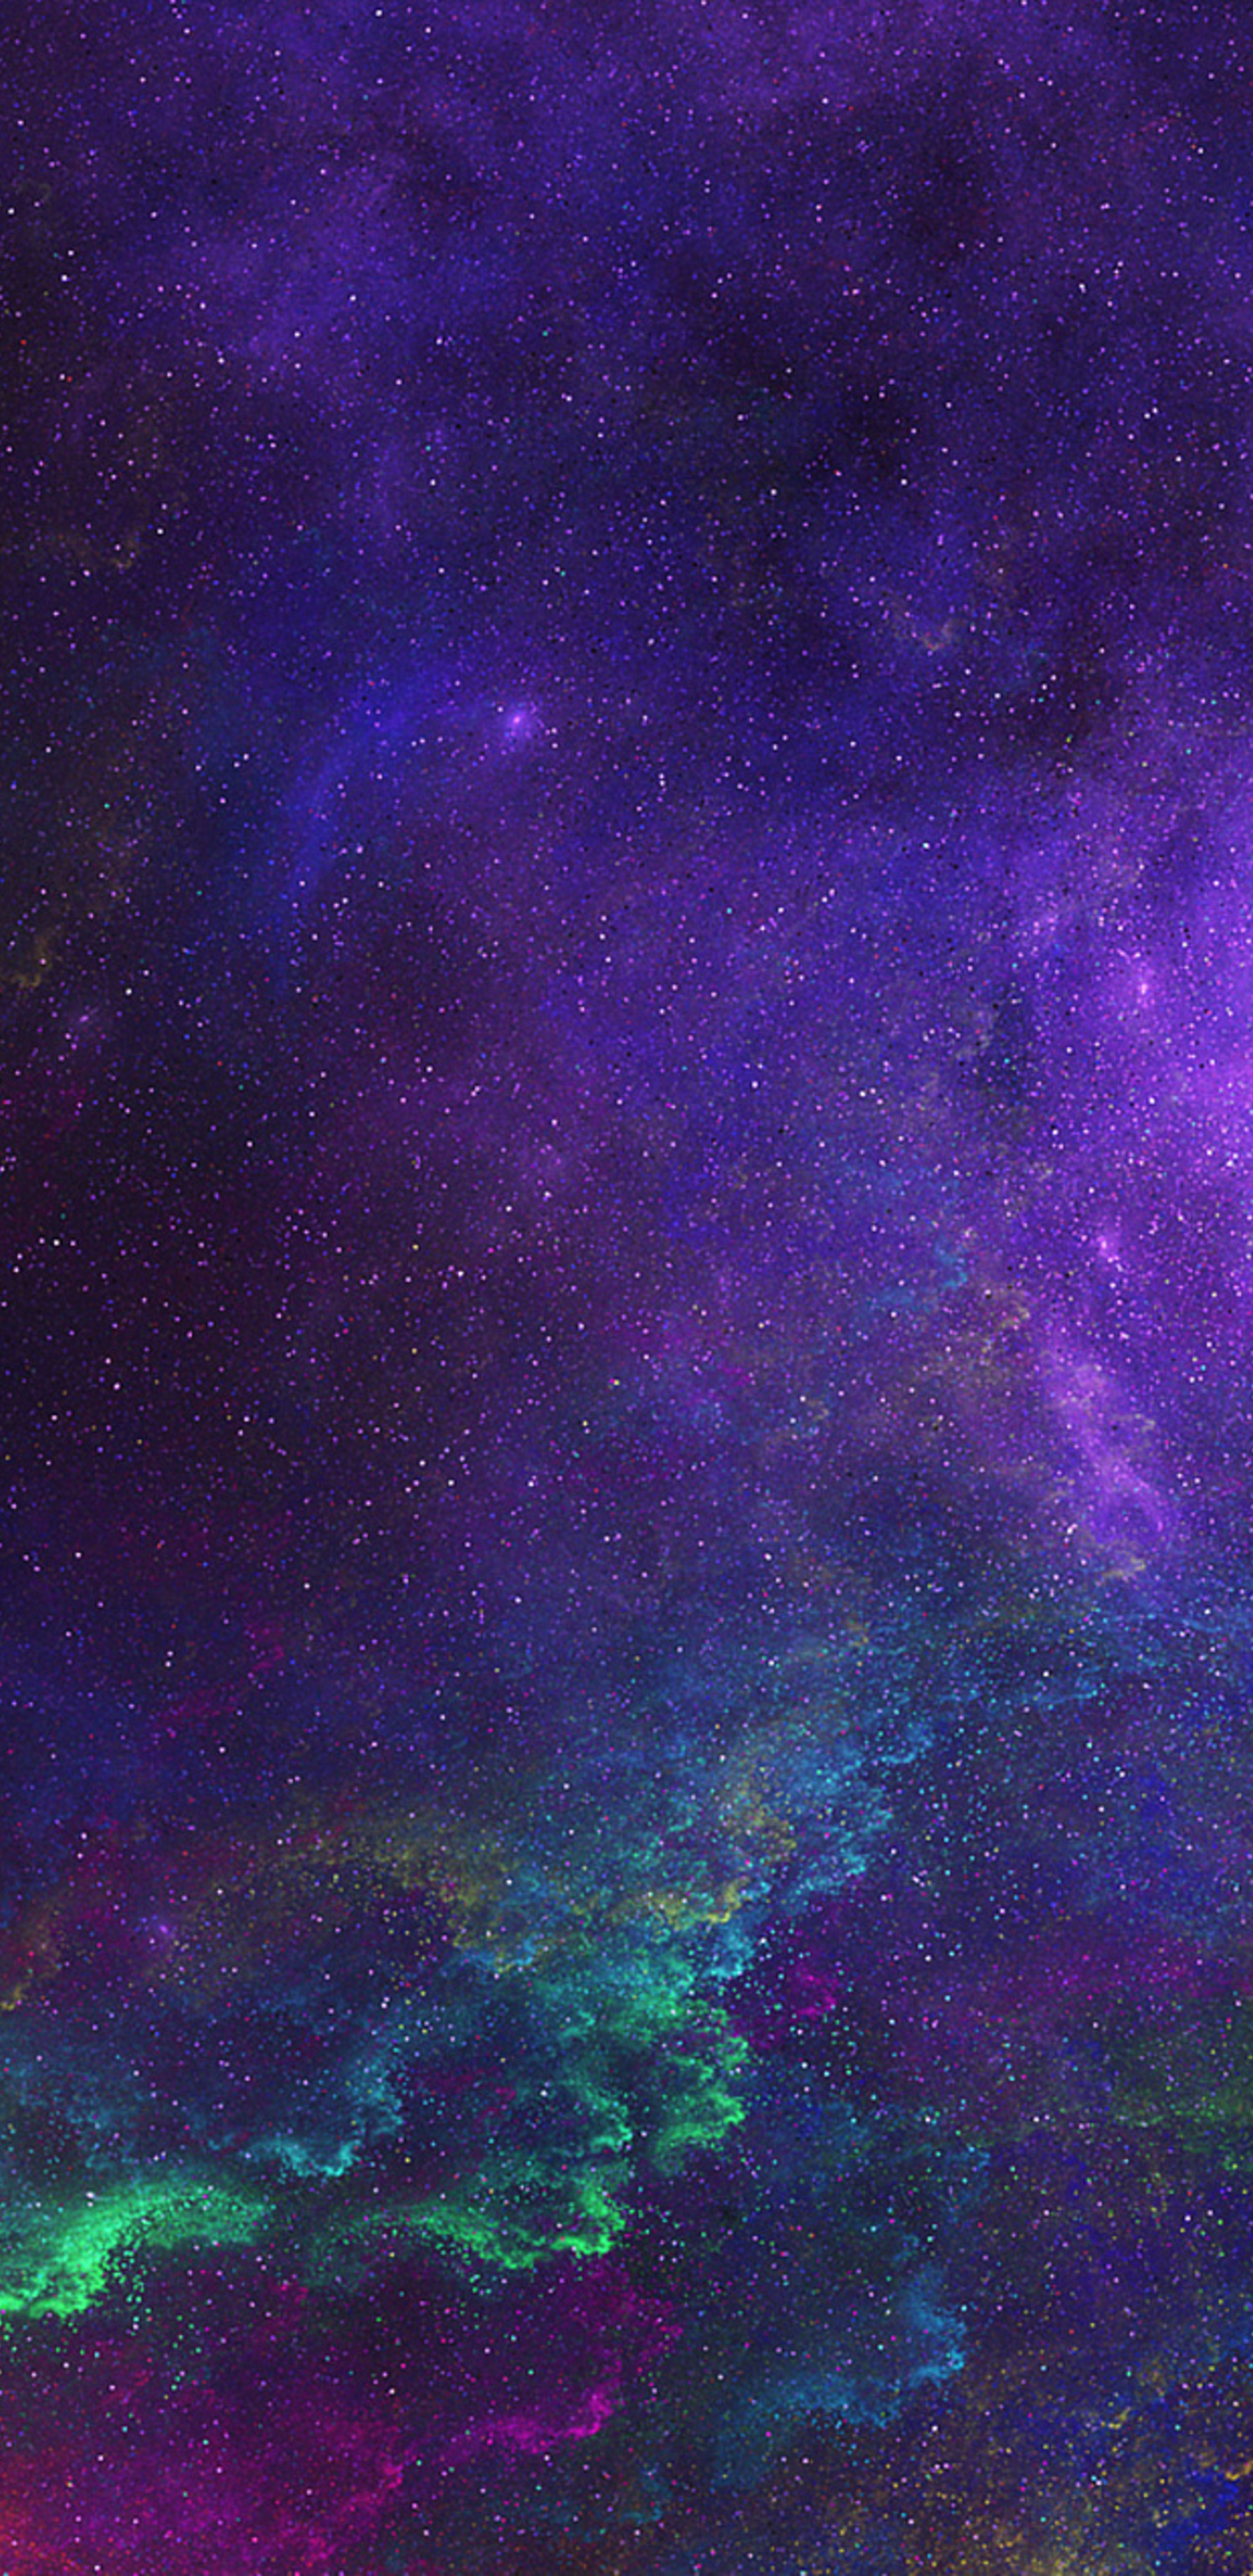 1440x2960 Colorful Space Samsung Galaxy Note 9,8, S9,S8,S8 ...